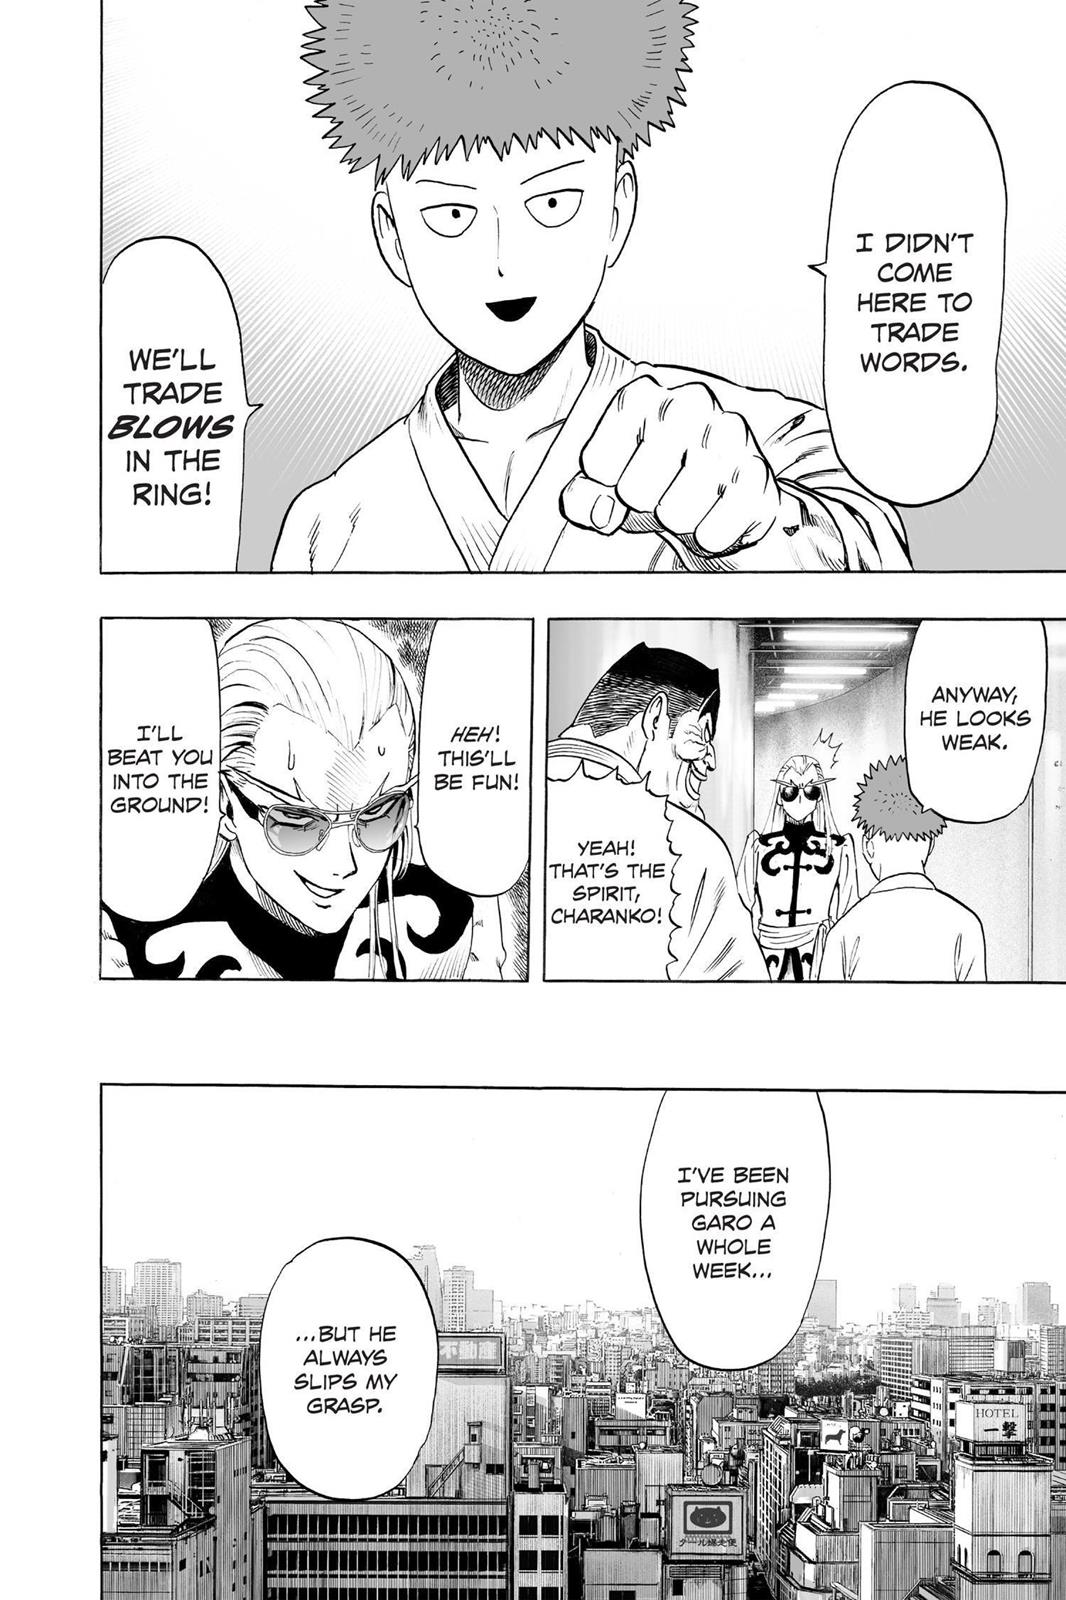 One-Punch Man, Punch 60 image 18